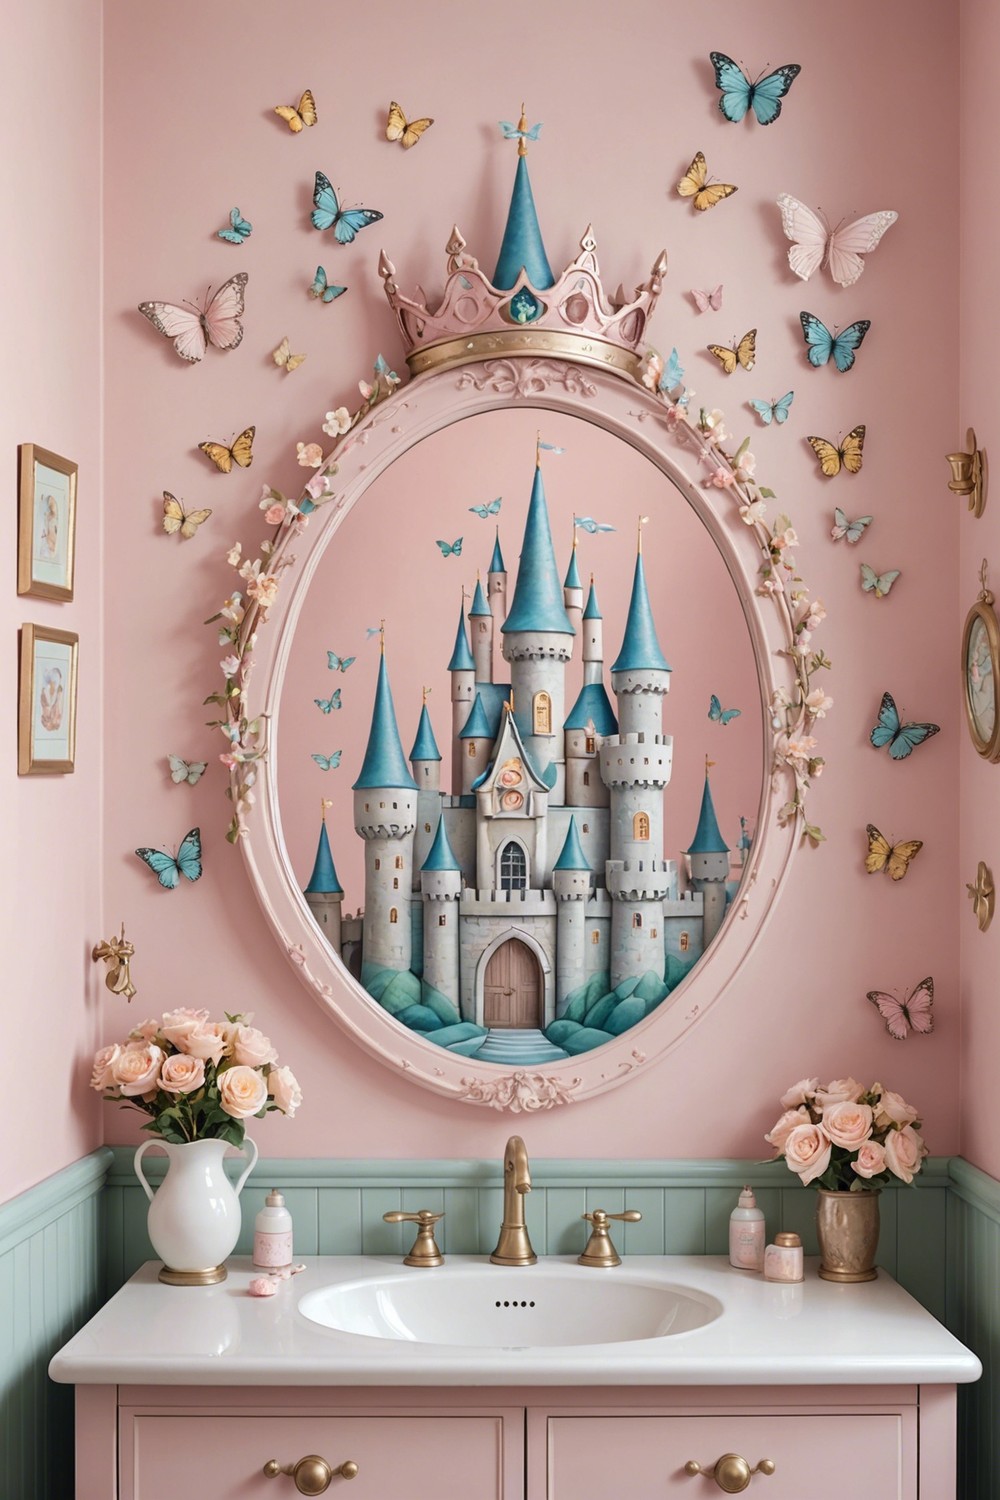 Little Princess Decals on the Walls